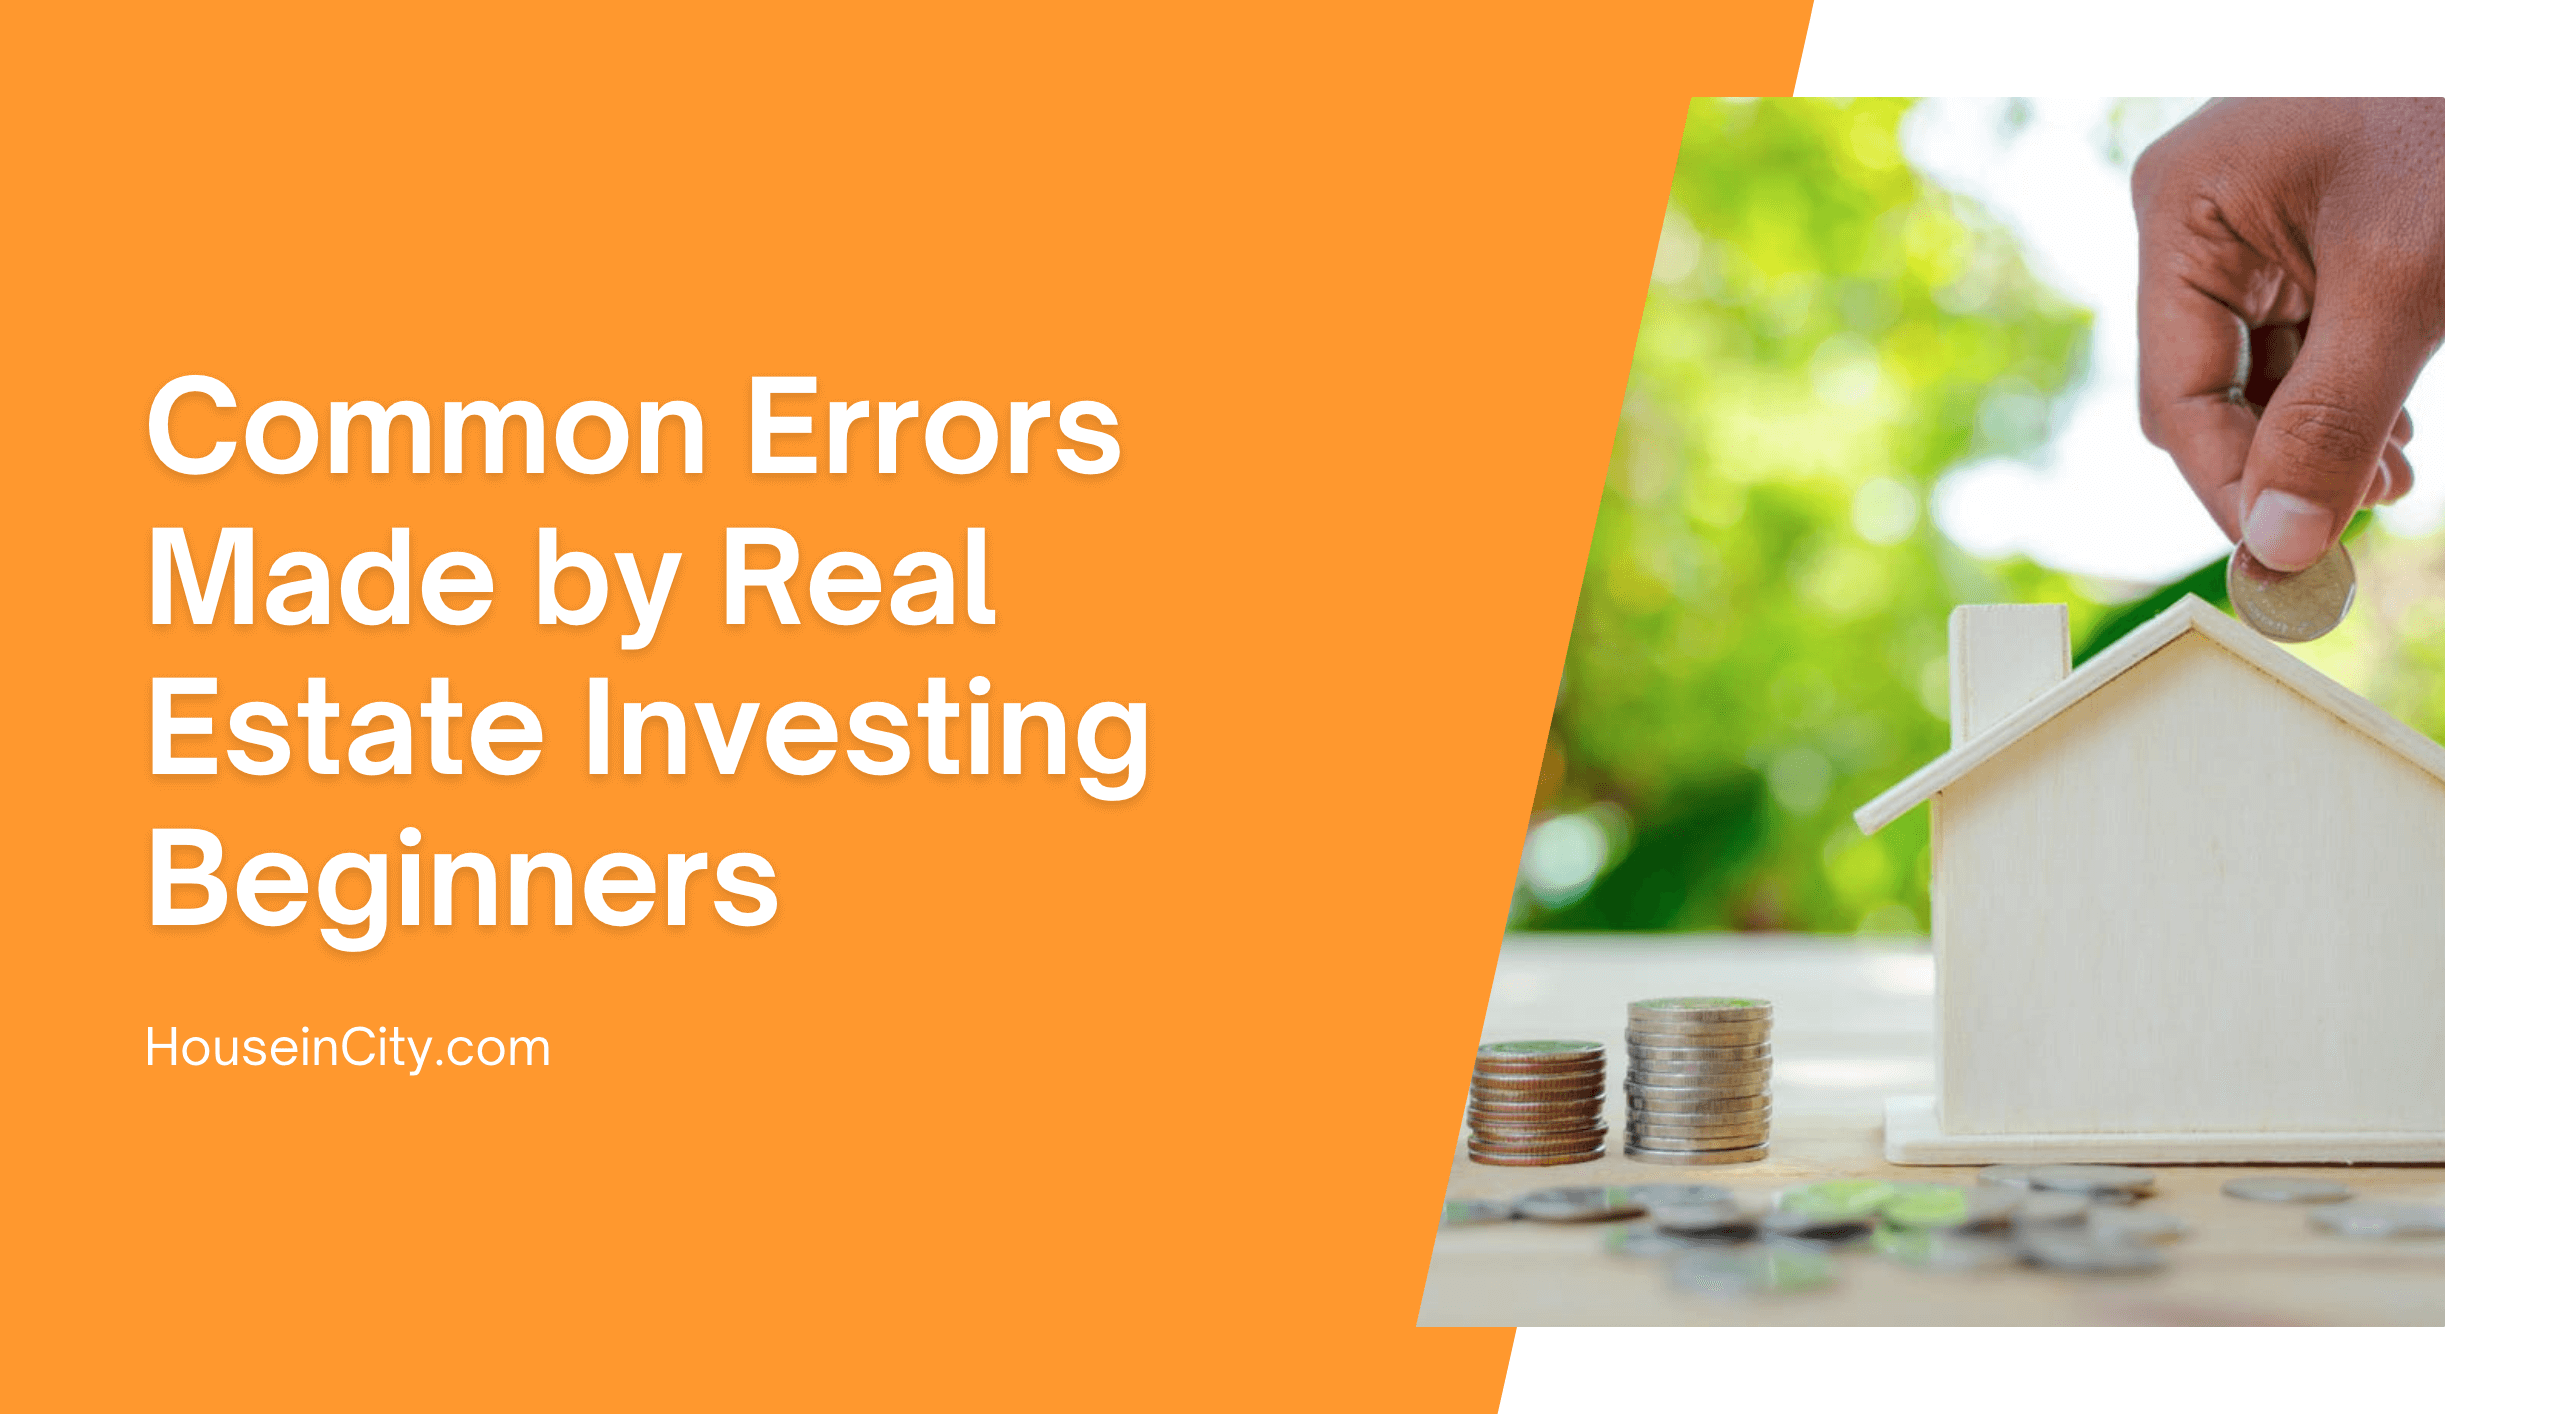 Common Errors Made by Real Estate Investing Beginners